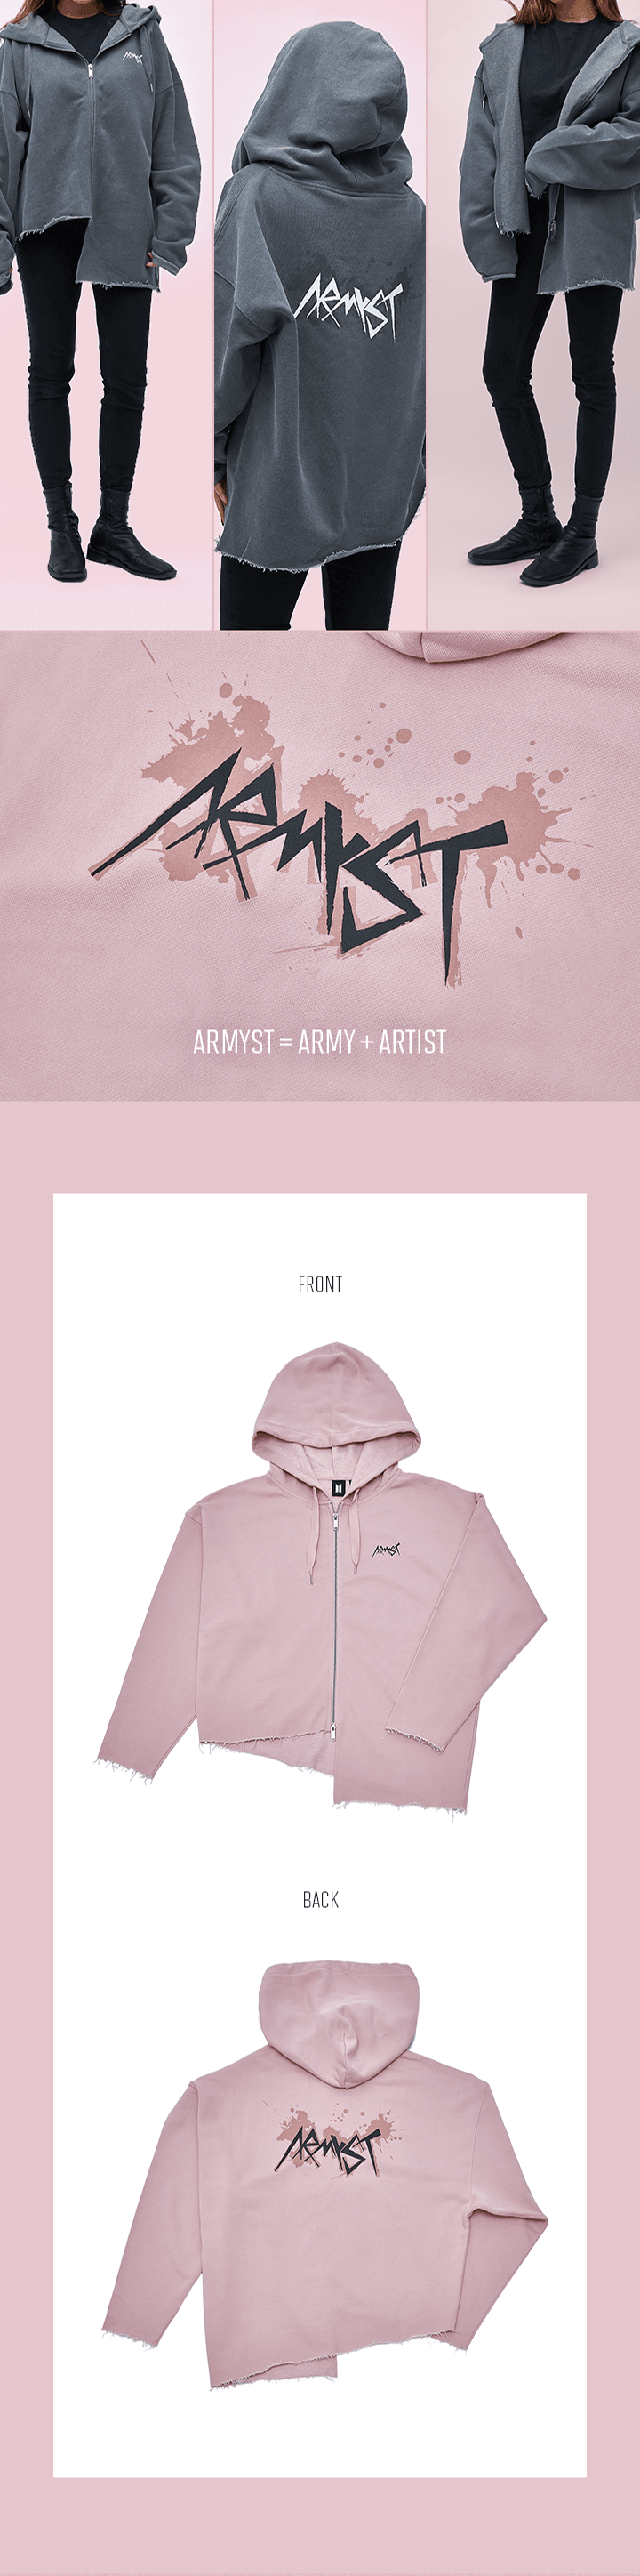 [4TH PRE-ORDER] ARTIST-MADE COLLECTION BY BTS JUNGKOOK